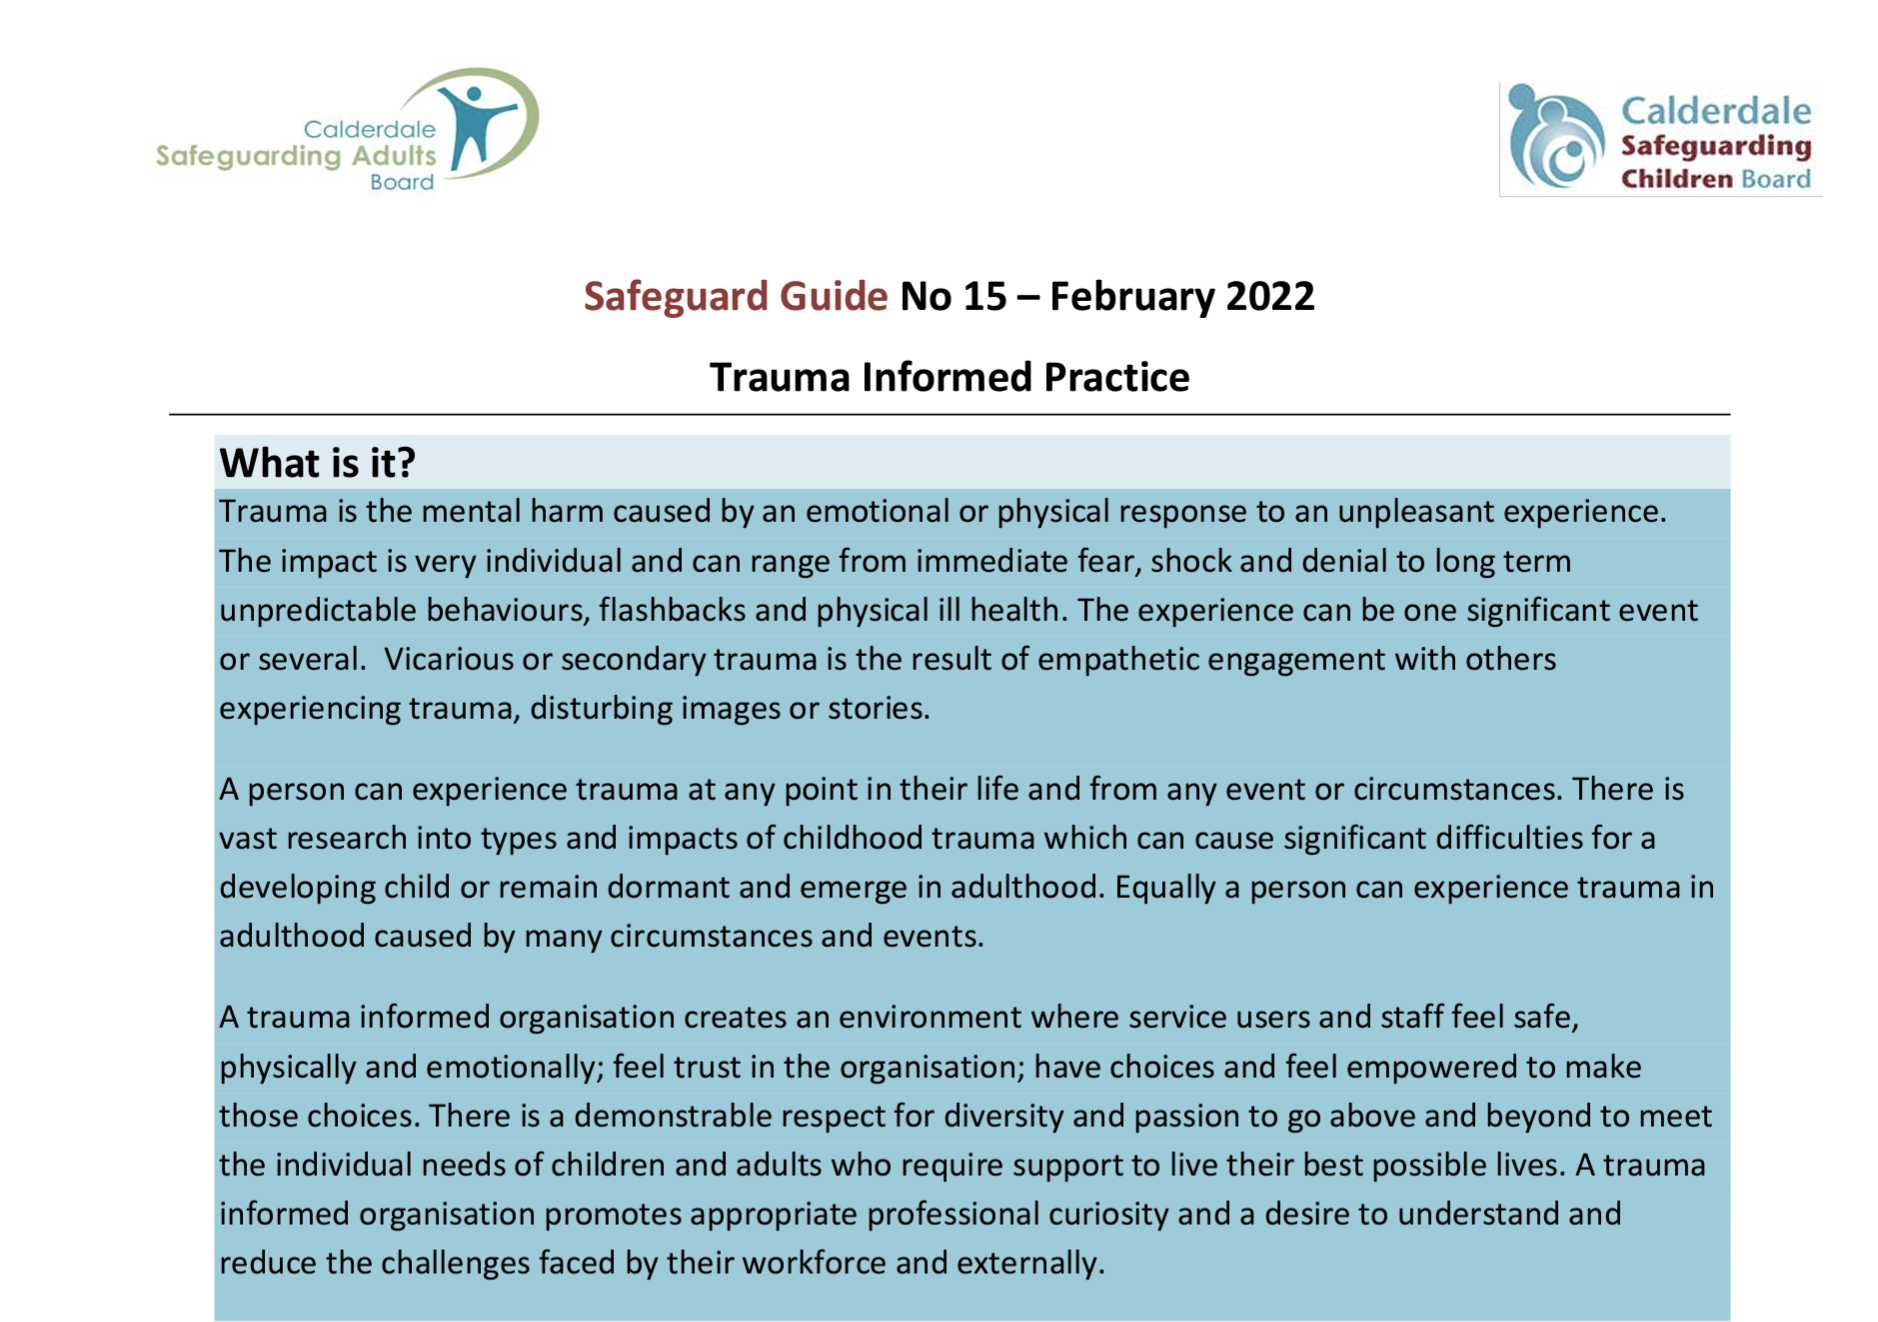 Calderdale Safeguard Guide on Trauma Informed Practice document